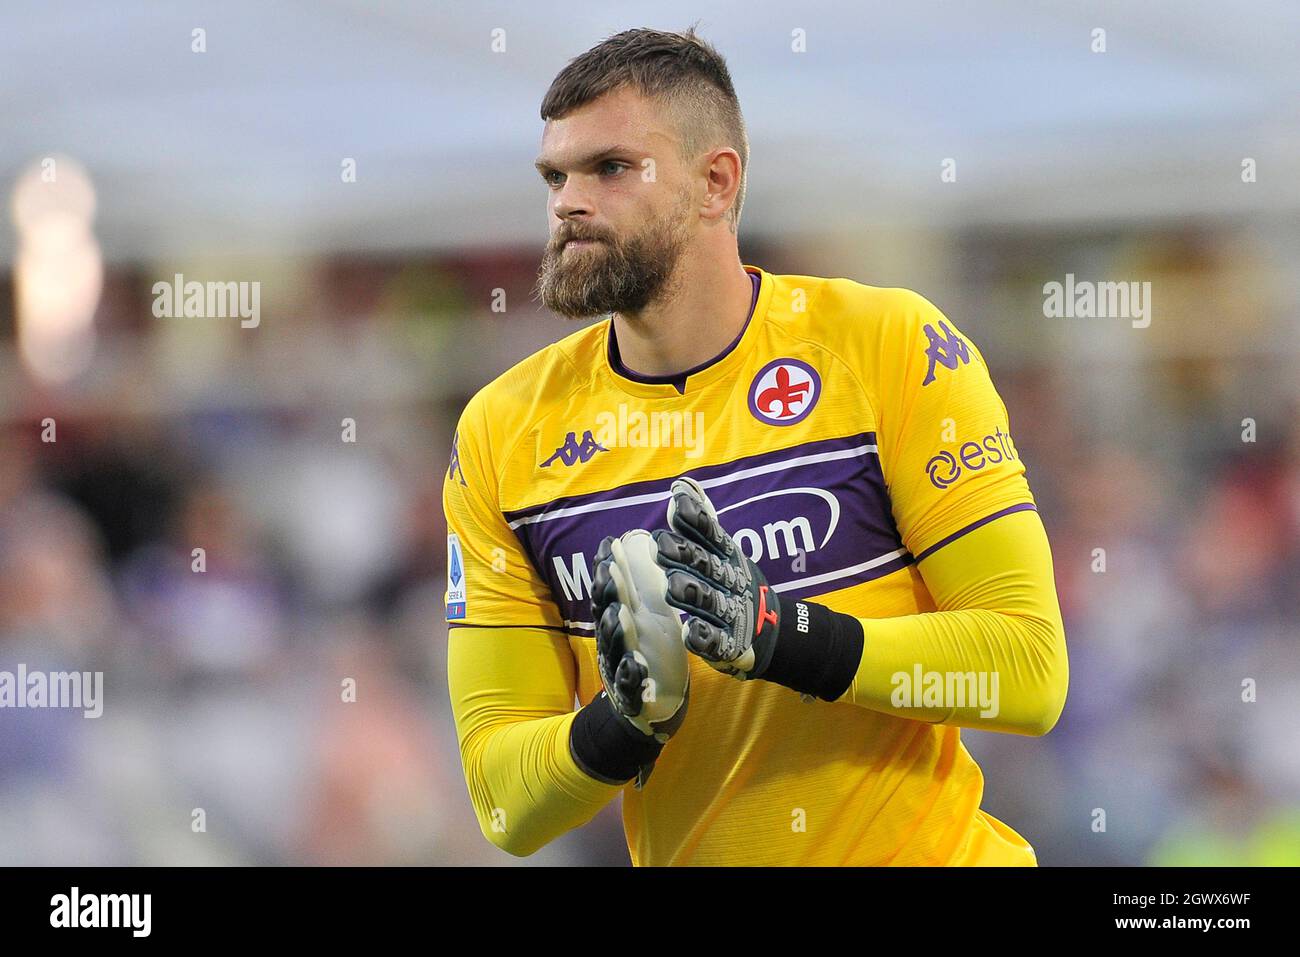 Firenze, Italy. 03rd Oct, 2021. Bartlomiej Dragowski player of Fiorentina, during the match of the Italian Serie A league between Fiorentina vs Napoli final result 1-2, match played at the Artemio Franchi stadium in Florence. Florence, Italy, October 03, 2021. (photo by Vincenzo Izzo/Sipa USA) Credit: Sipa USA/Alamy Live News Stock Photo